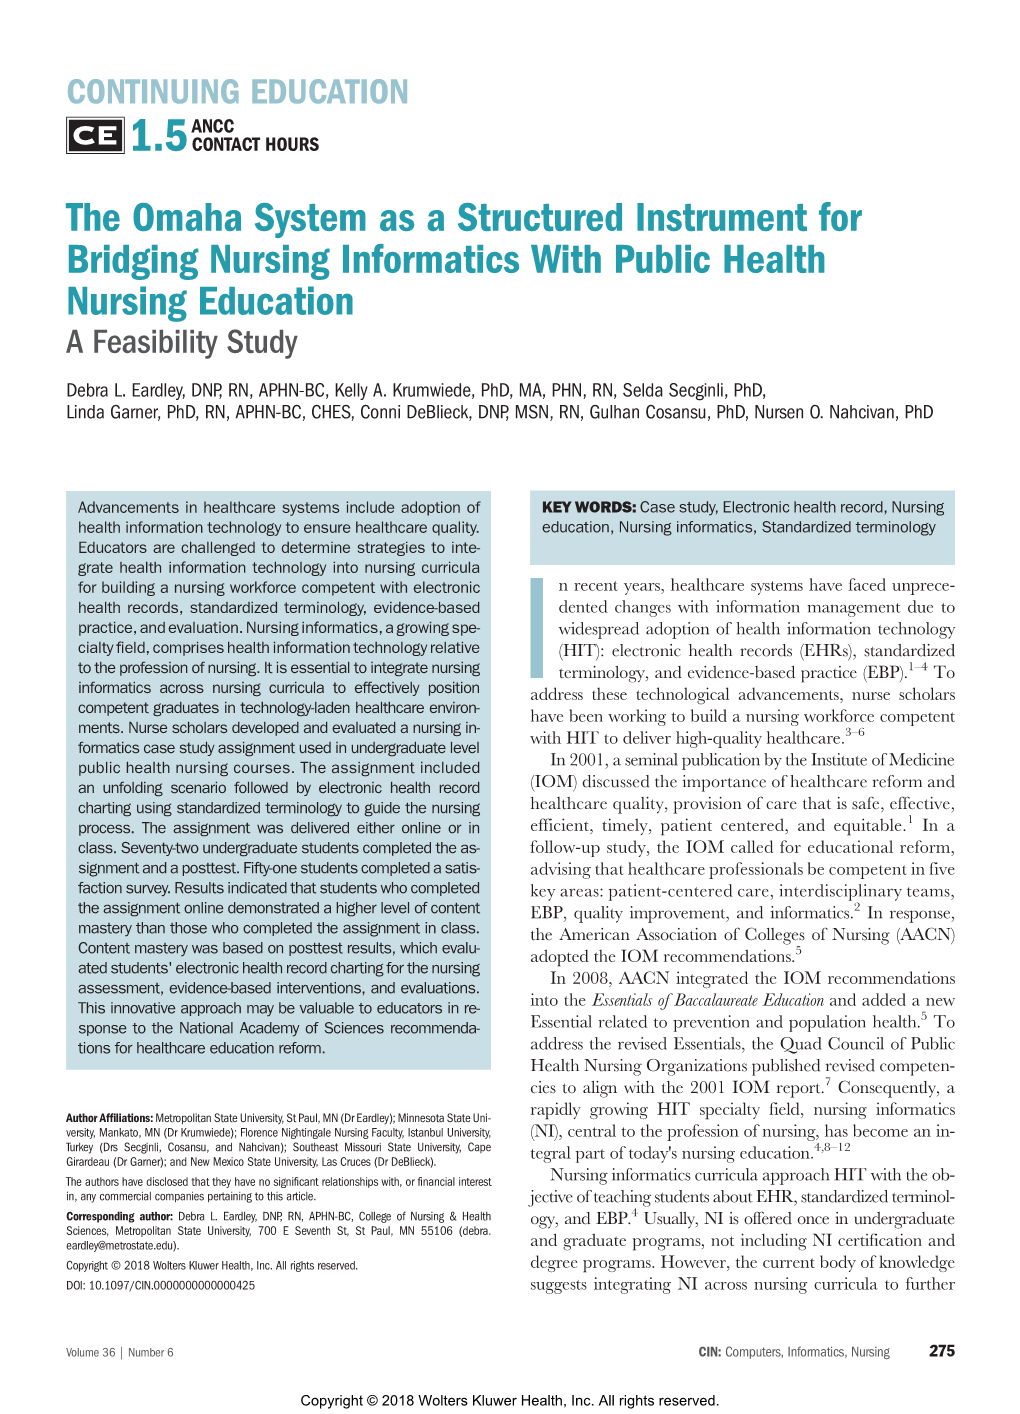 The Omaha System As a Structured Instrument for Bridging Nursing Informatics with Public Health Nursing Education a Feasibility Study